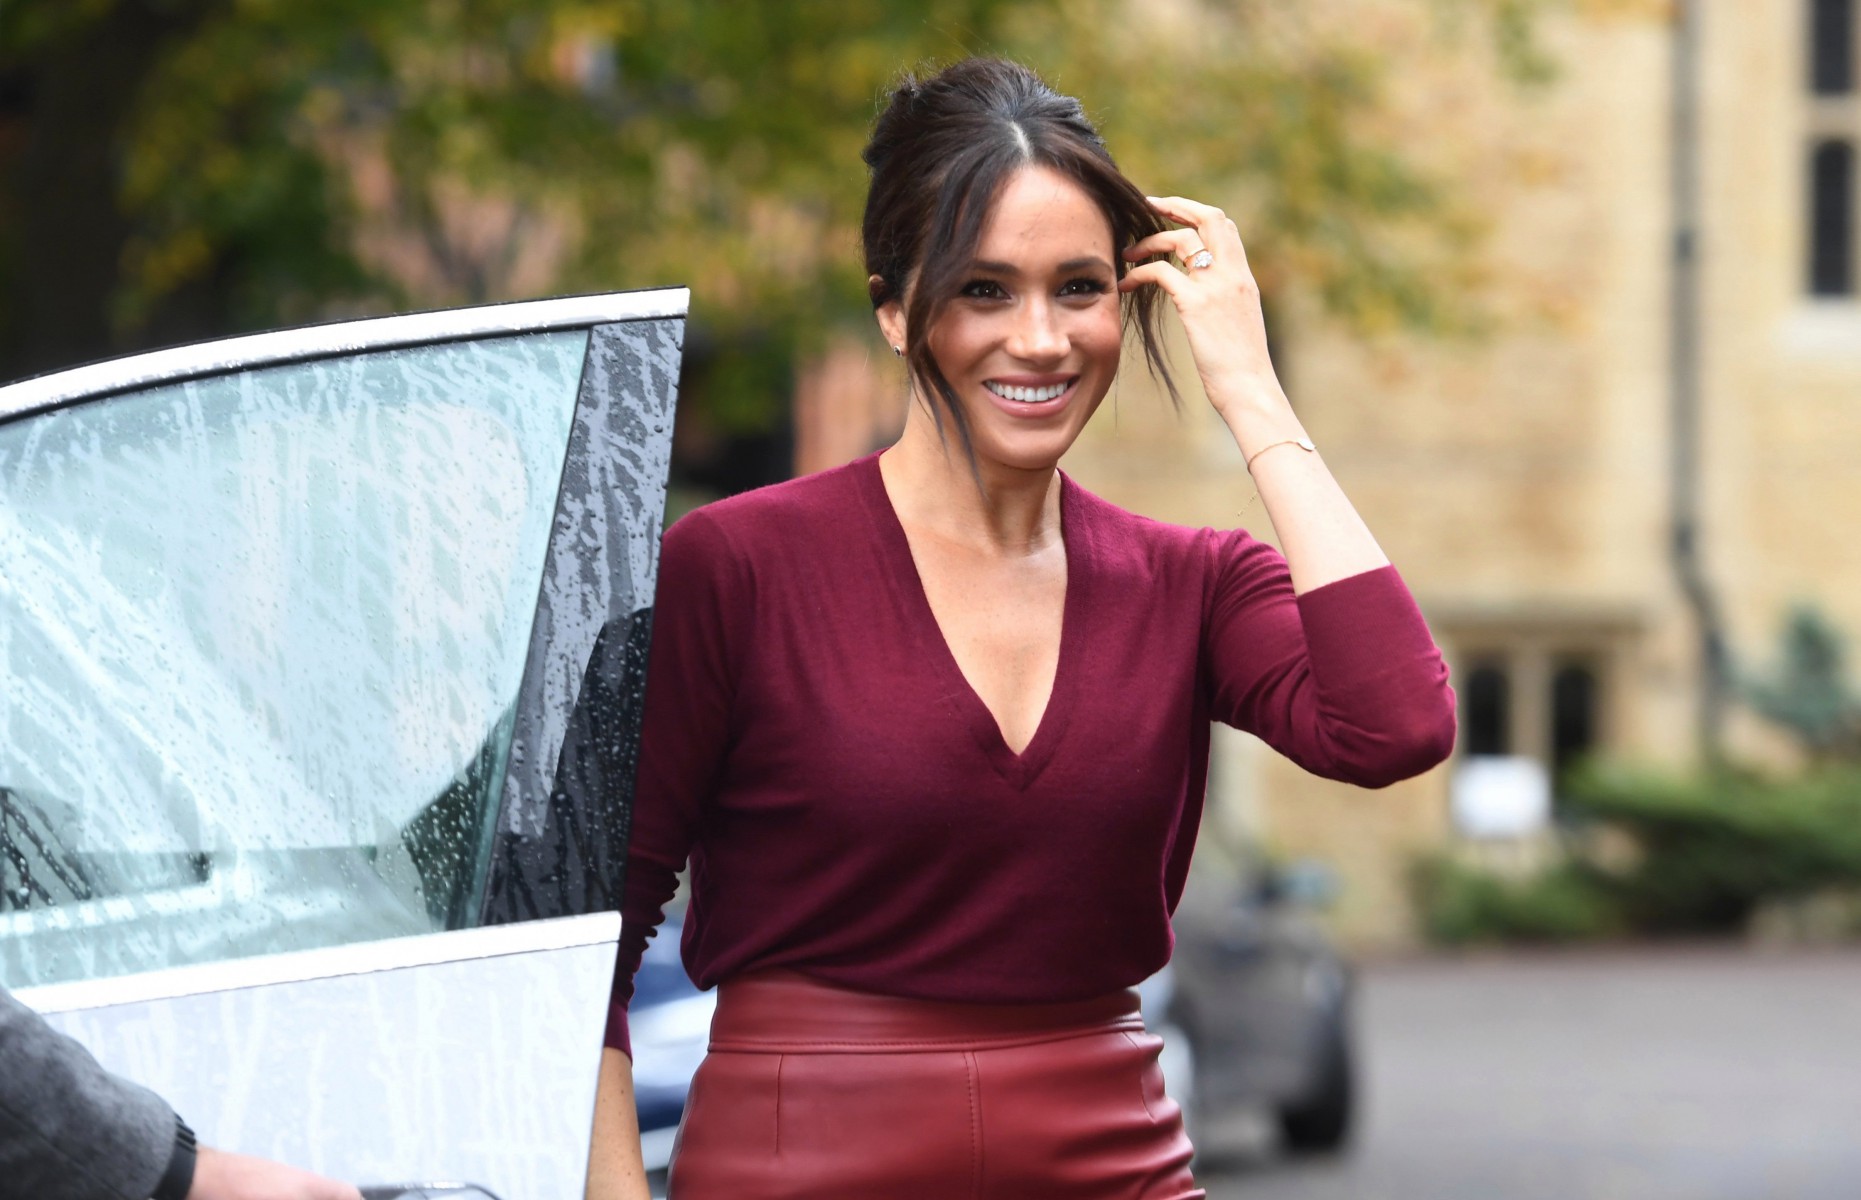 According to reports, Meghan was earning 350k per year before she met Prince Harry